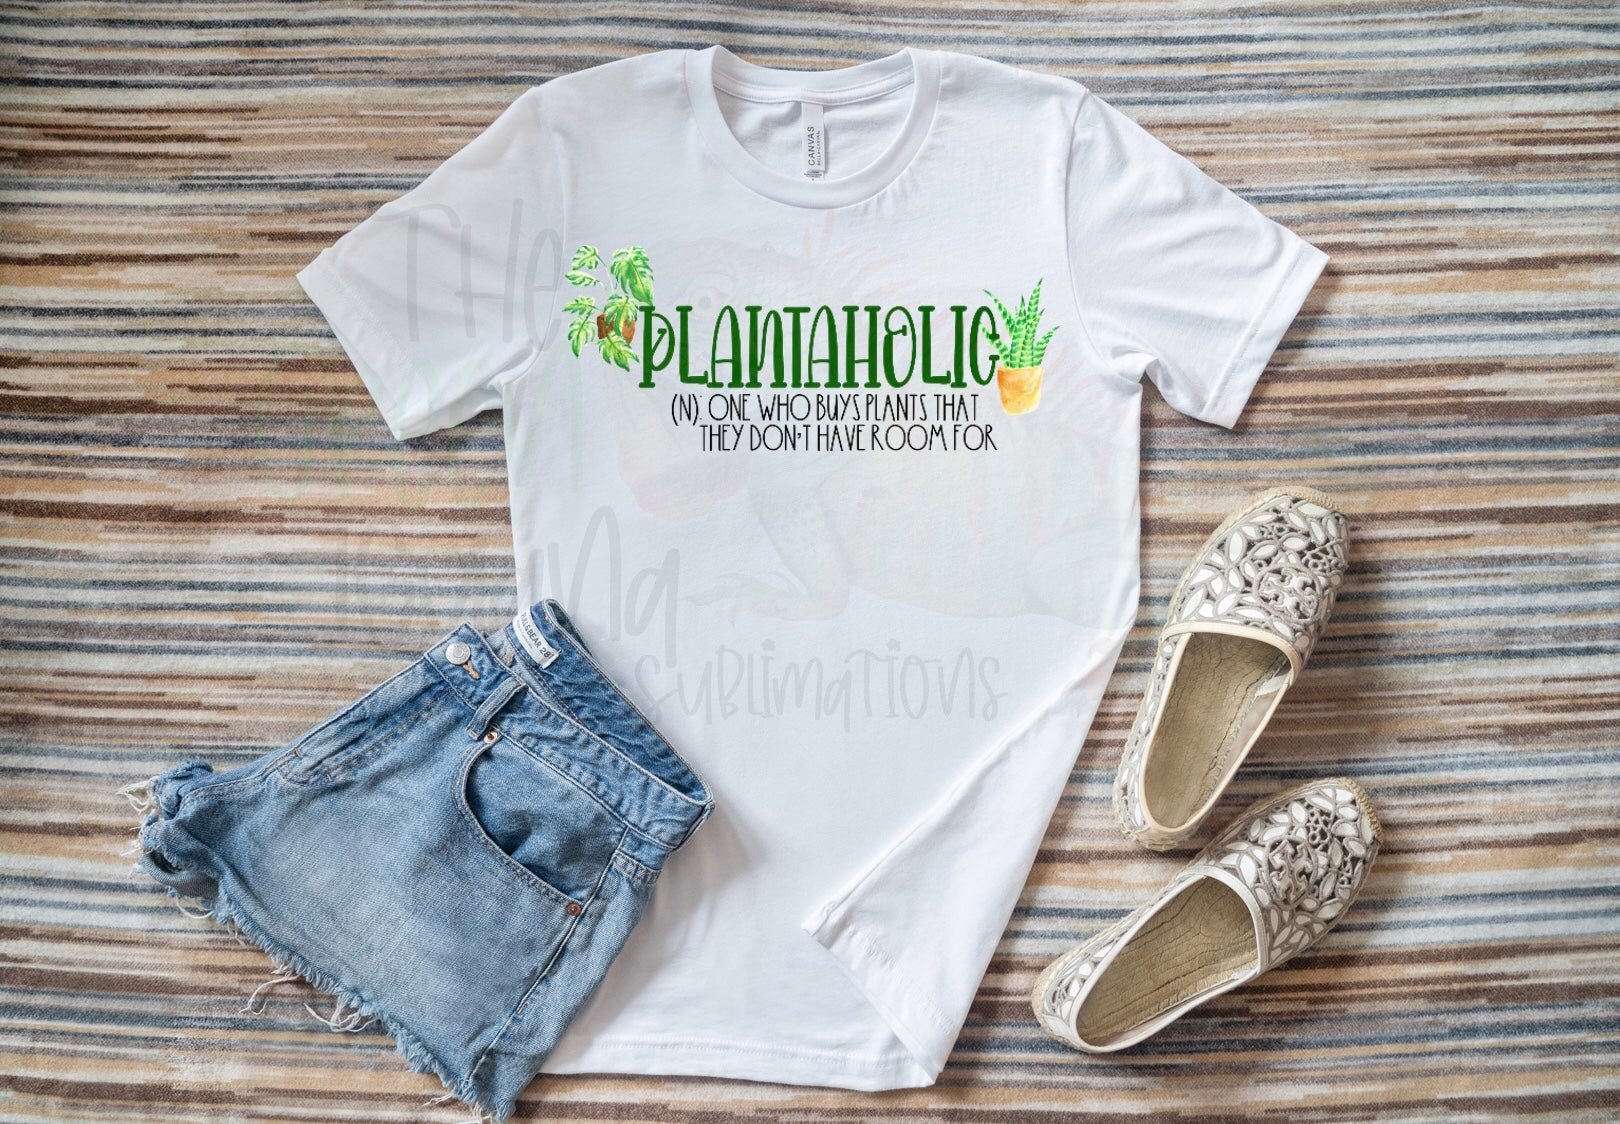 Plantaholic. One who buys plants that they don’t have room for DIGITAL